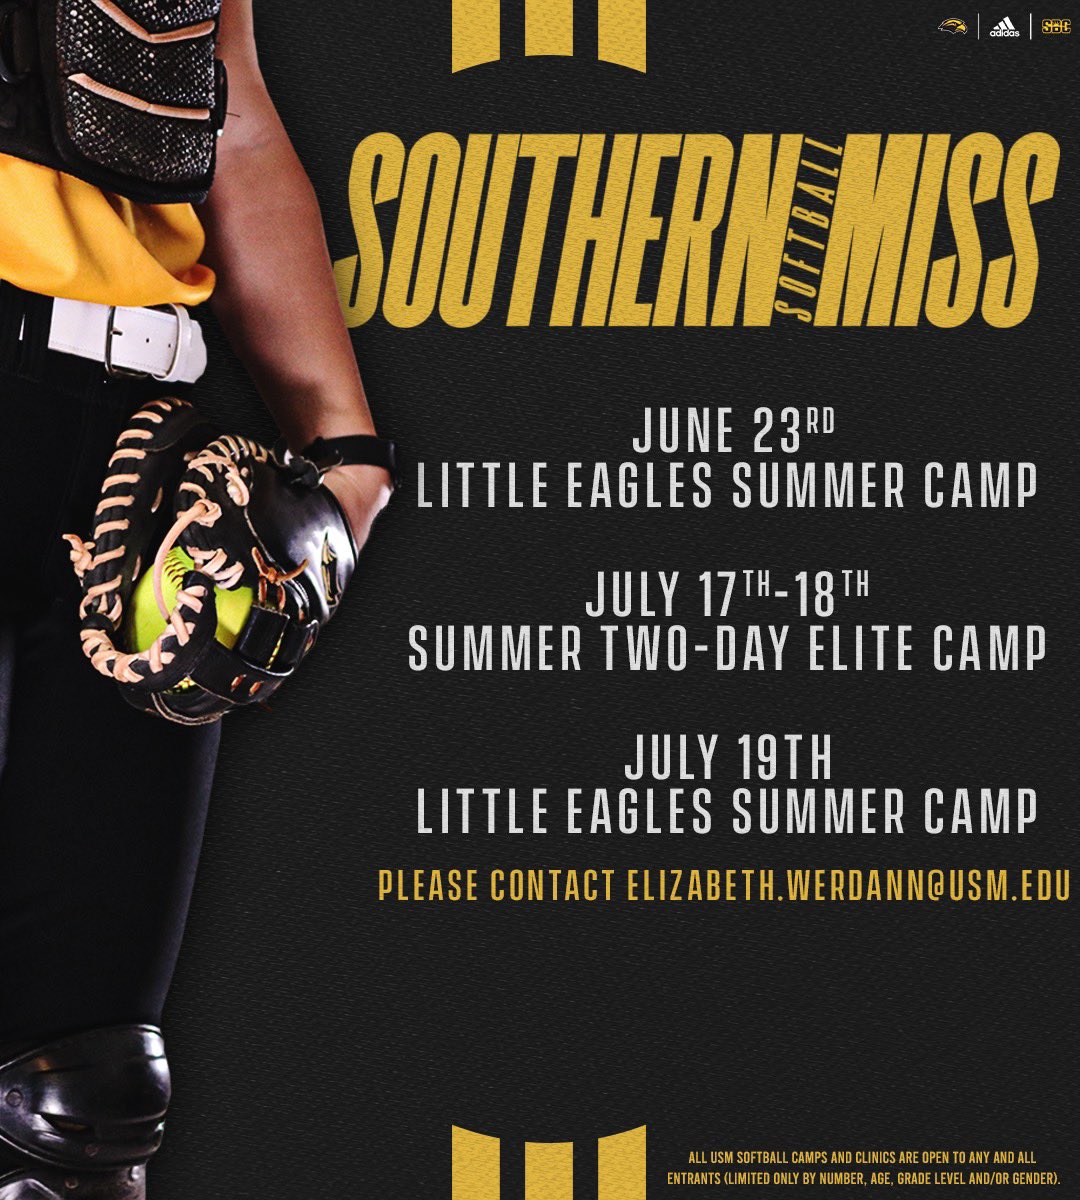 𝐊𝐞𝐞𝐩𝐢𝐧’ 𝐢𝐭 𝐜𝐨𝐨𝐥 𝐚𝐥𝐥 𝐬𝐮𝐦𝐦𝐞𝐫 𝐥𝐨𝐧𝐠 ☀️

Don’t miss out on all our summer events‼️

#SMTTT | #RiseAsOne